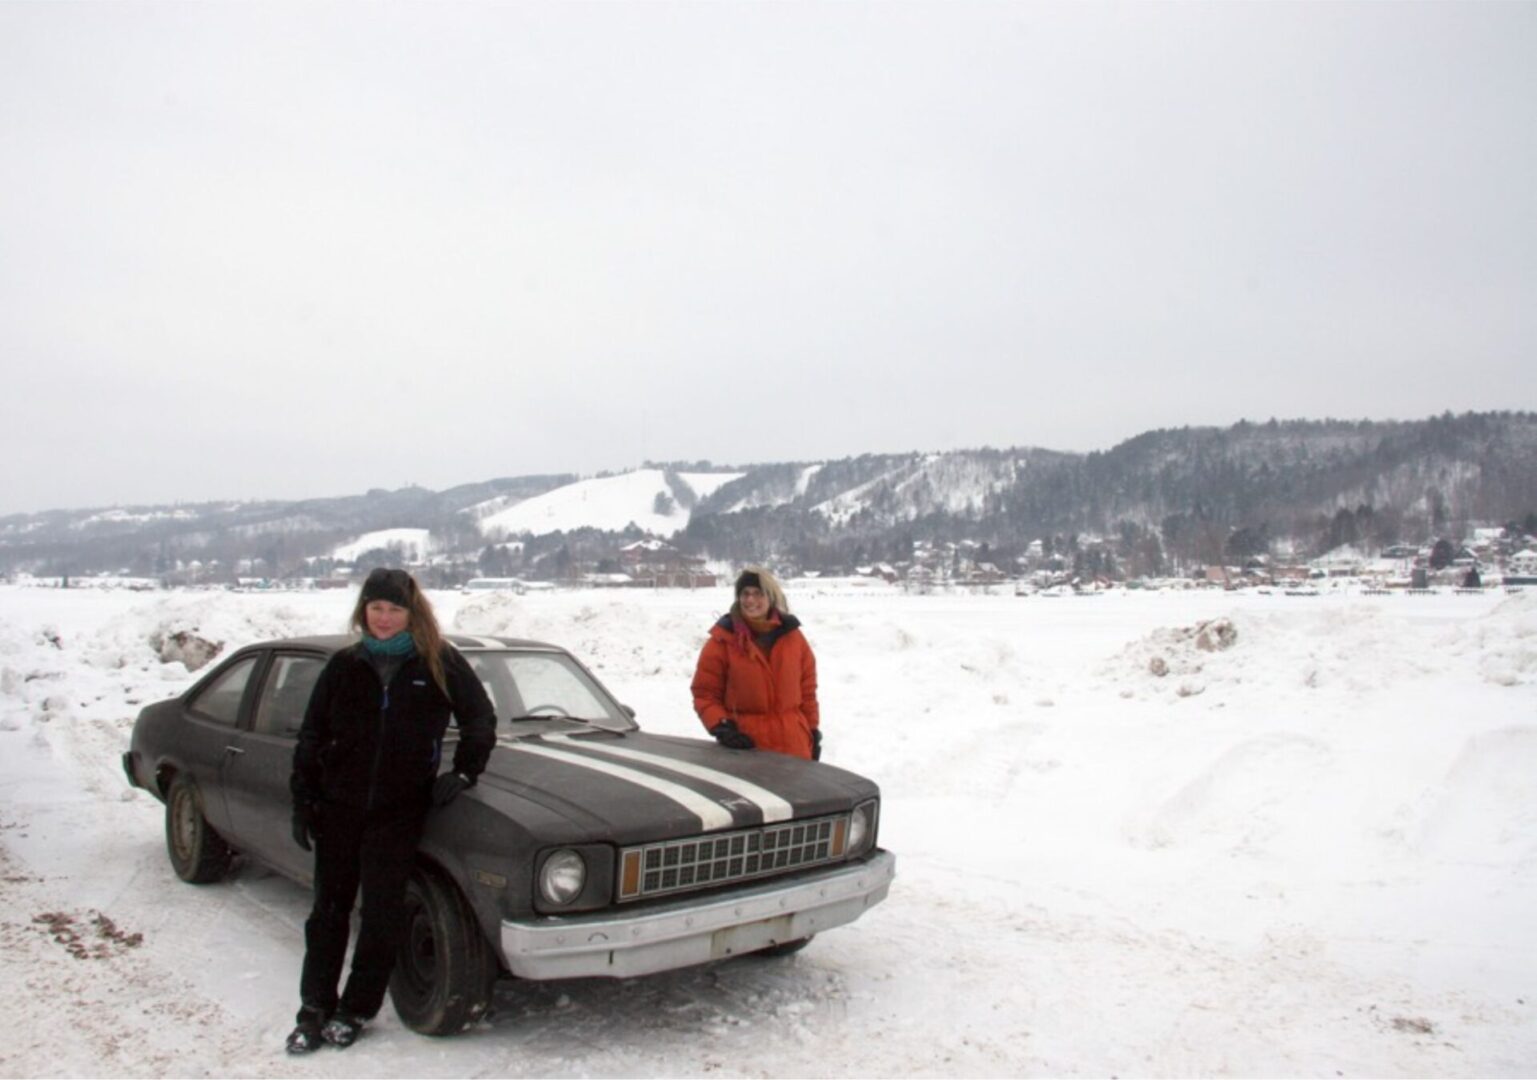 Mary Carothers and Sue Wrbican standing along with car on the snowy path